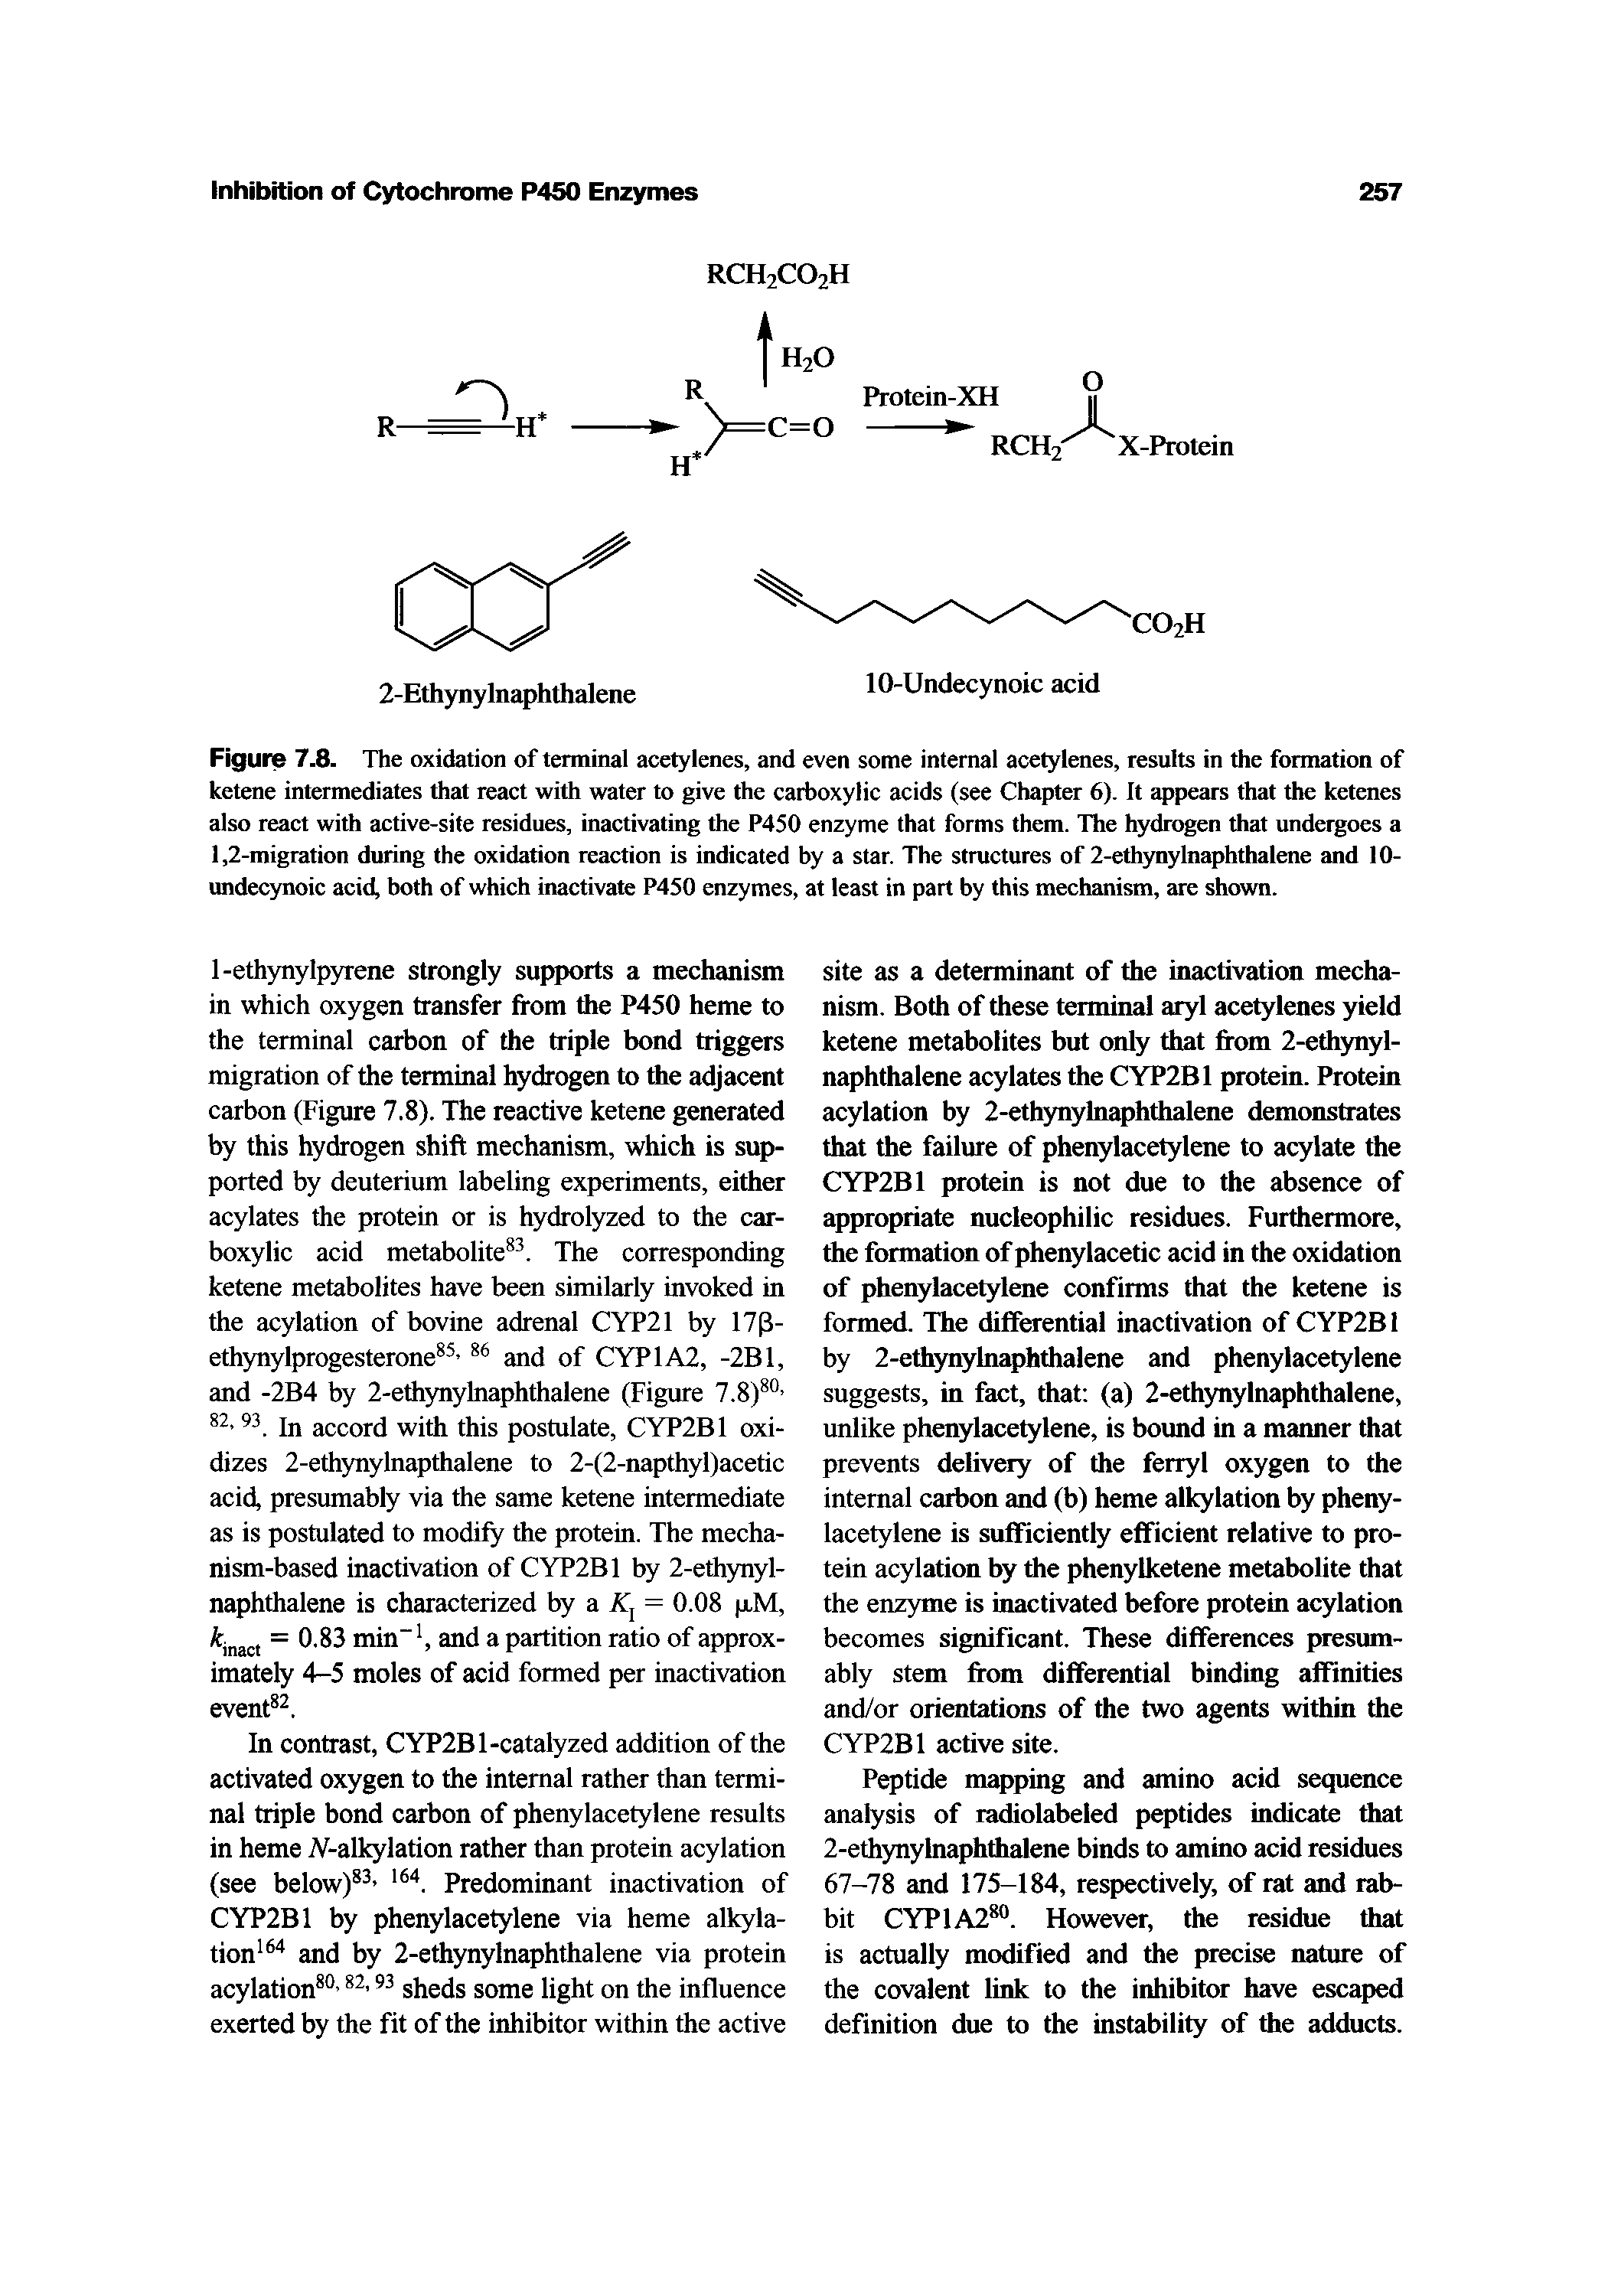 Figure 7.8. The oxidation of terminal acetylenes, and even some internal acetylenes, results in the formation of ketene intermediates that react with water to give the carboxylic acids (see Chapter 6). It appears that the ketenes also react with active-site residues, inactivating the P450 enzyme that forms them. The hydrogen that undergoes a 1,2-migration during the oxidation reaction is indicated by a star. The structures of 2-ethynylnaphthalene and 10-undecynoic acid, both of which inactivate P450 enzymes, at least in part by this mechanism, are shown.